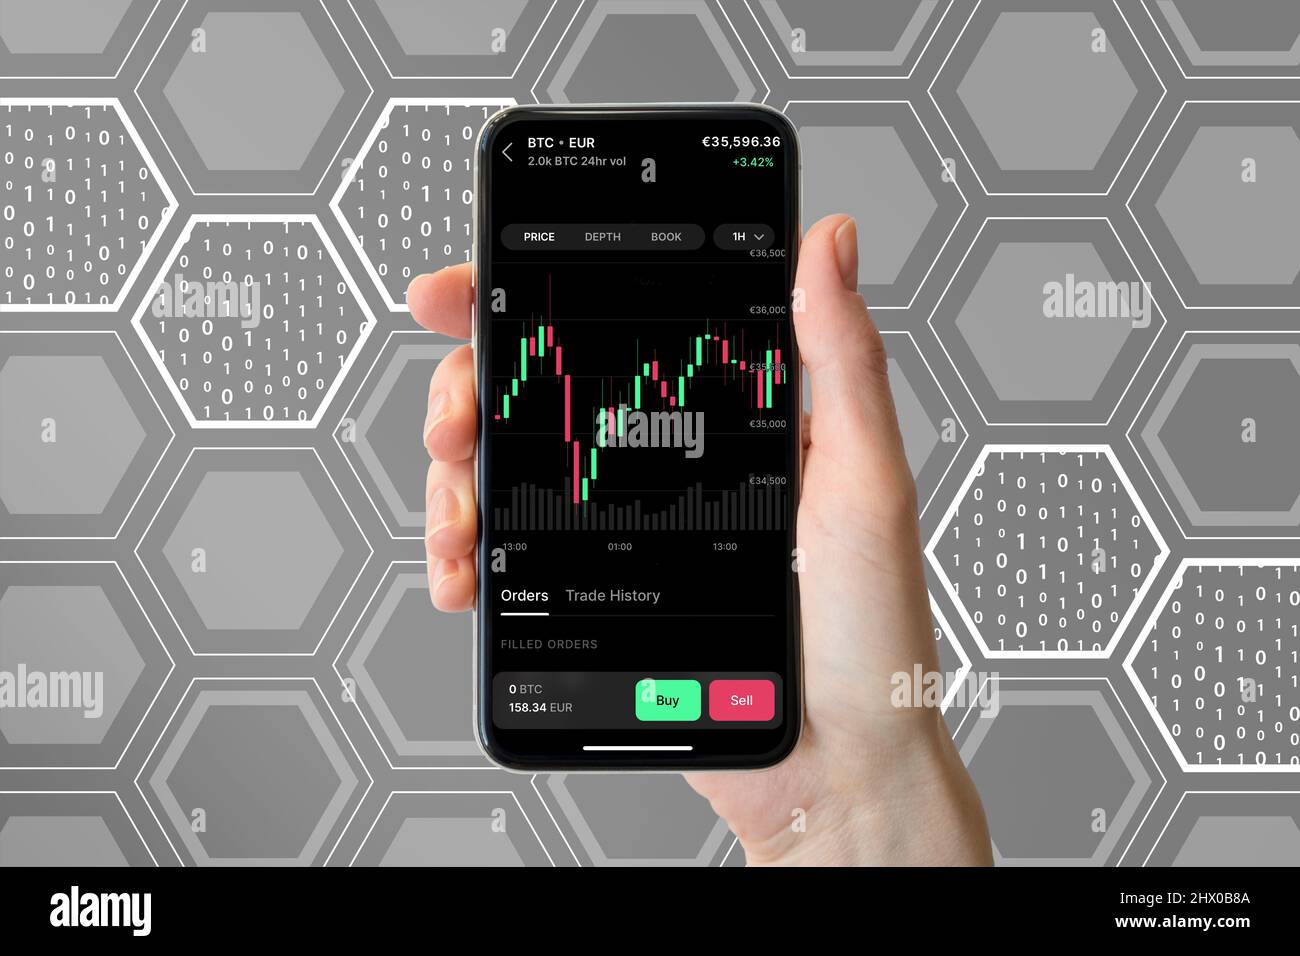 Frankfurt, Germany - 03 01 2022: Coinbase Pro app displayed on modern smart phone. Hand holding smart phone to trade crypto currency bitcoin in EUR. Stock Photo